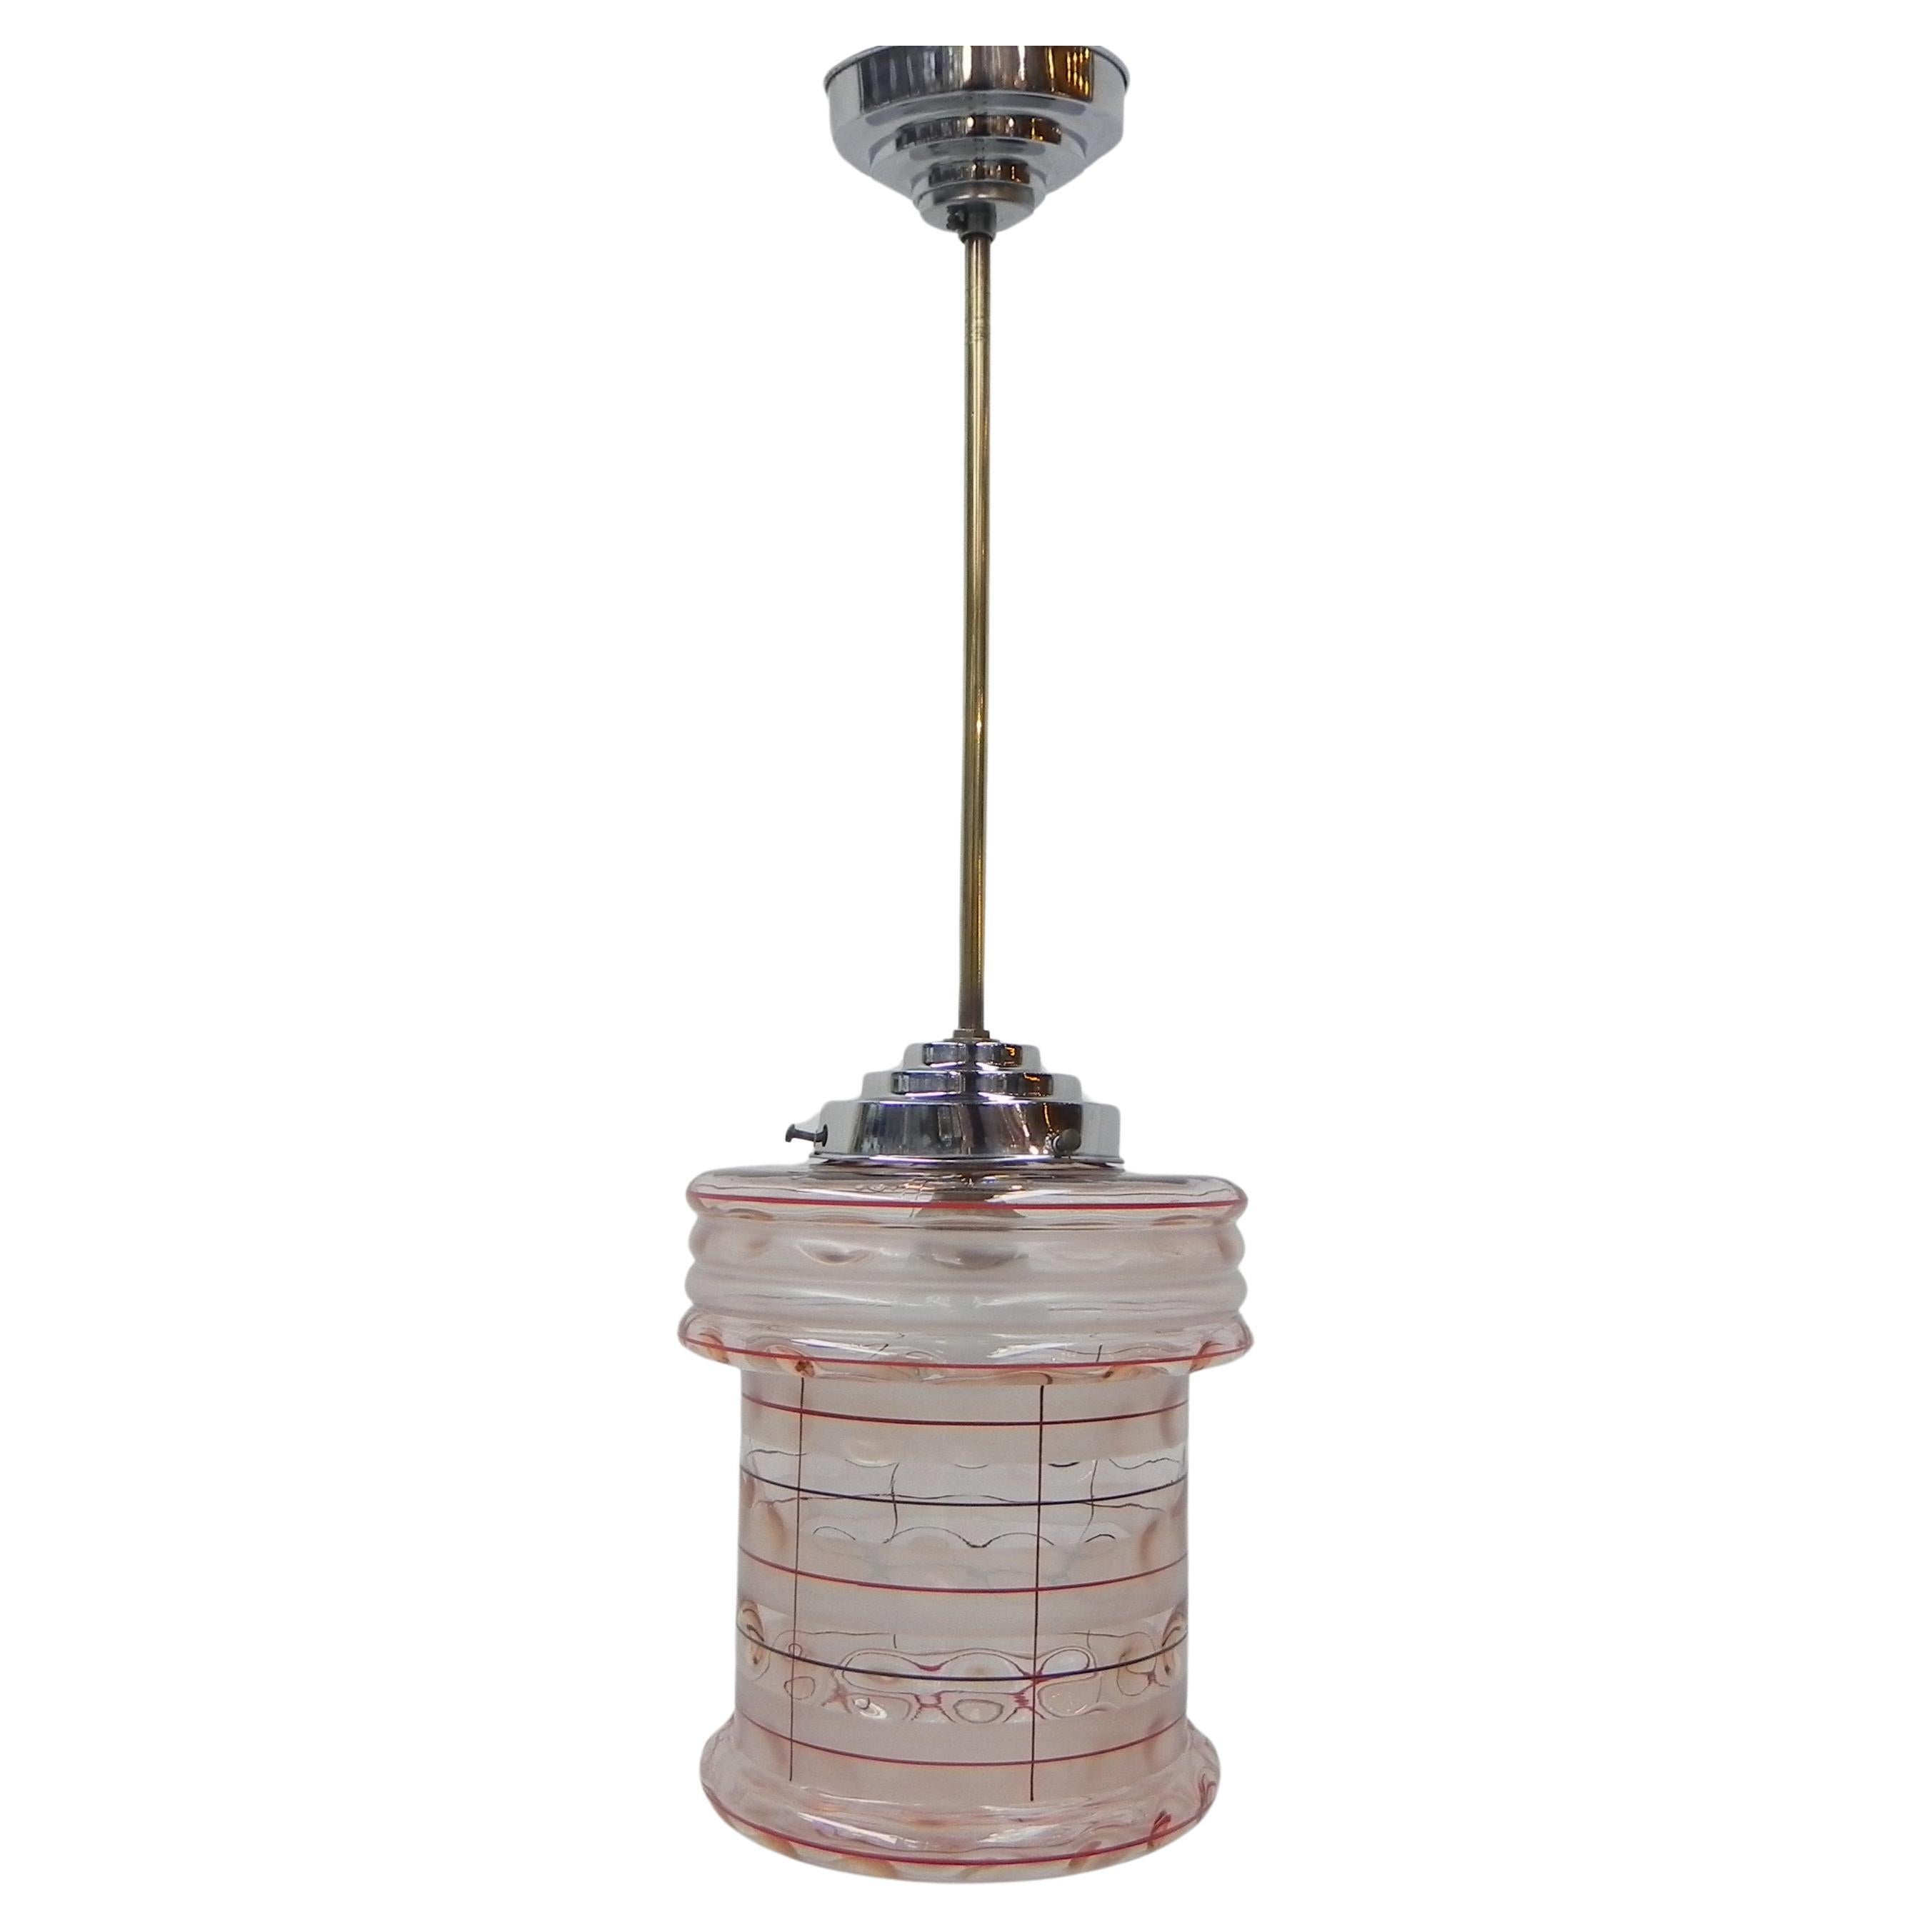 Art Deco hanging lamp with pink glass shade